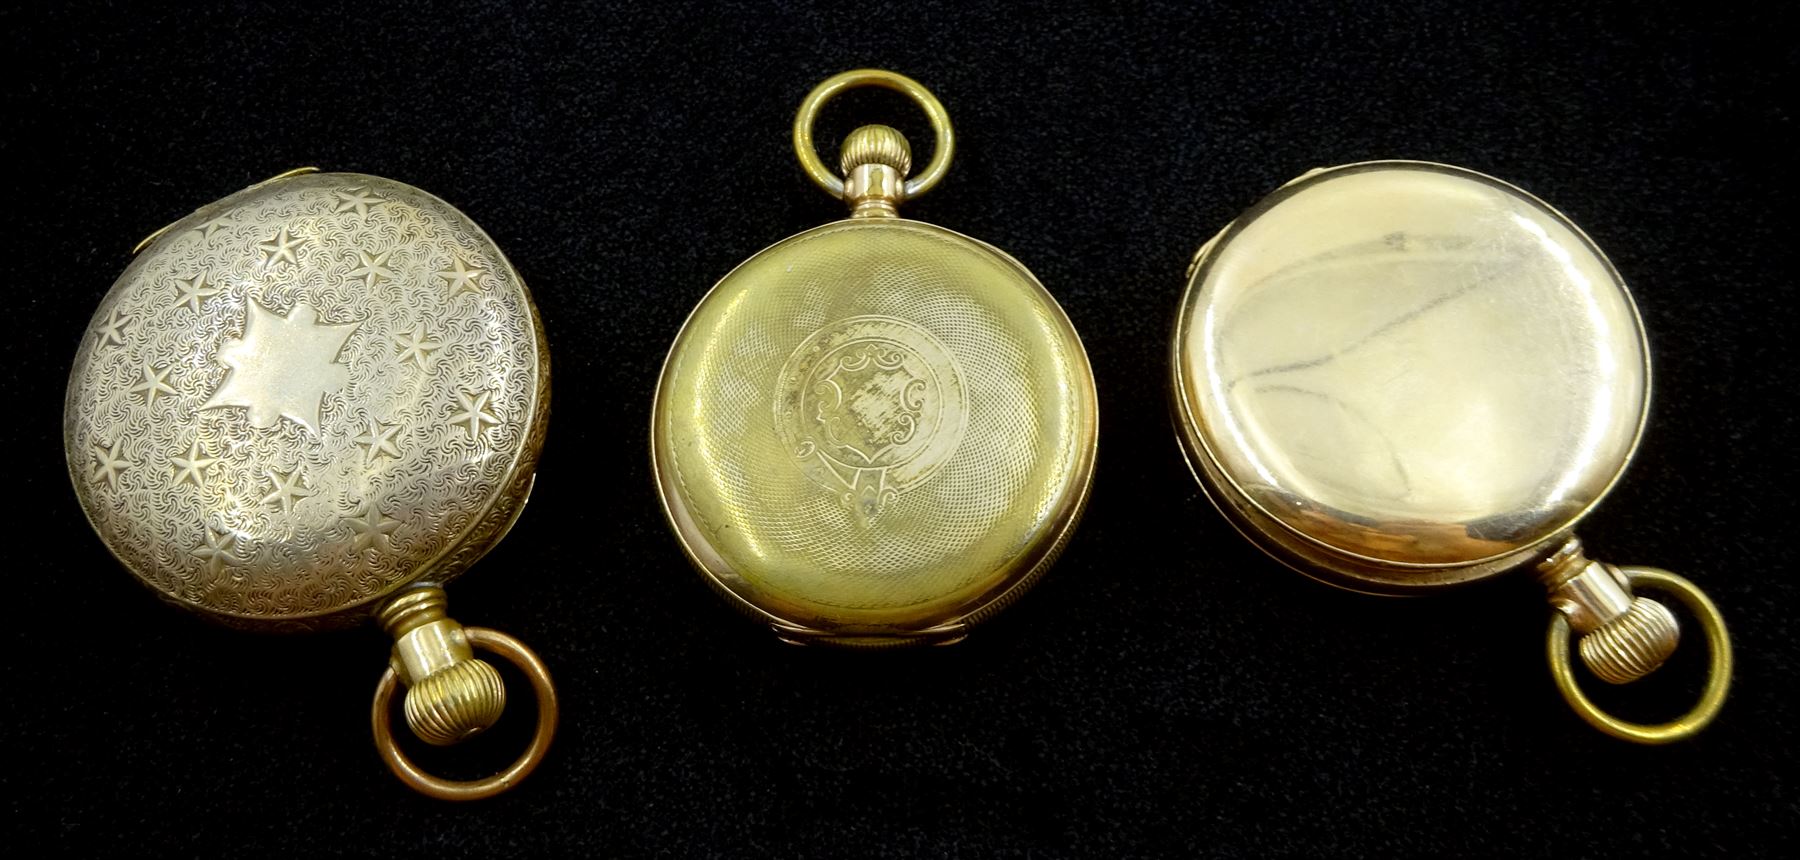 Three American gold-plated pockets including full hunter keyless Traveller pocket watch by Waltham - Image 2 of 3